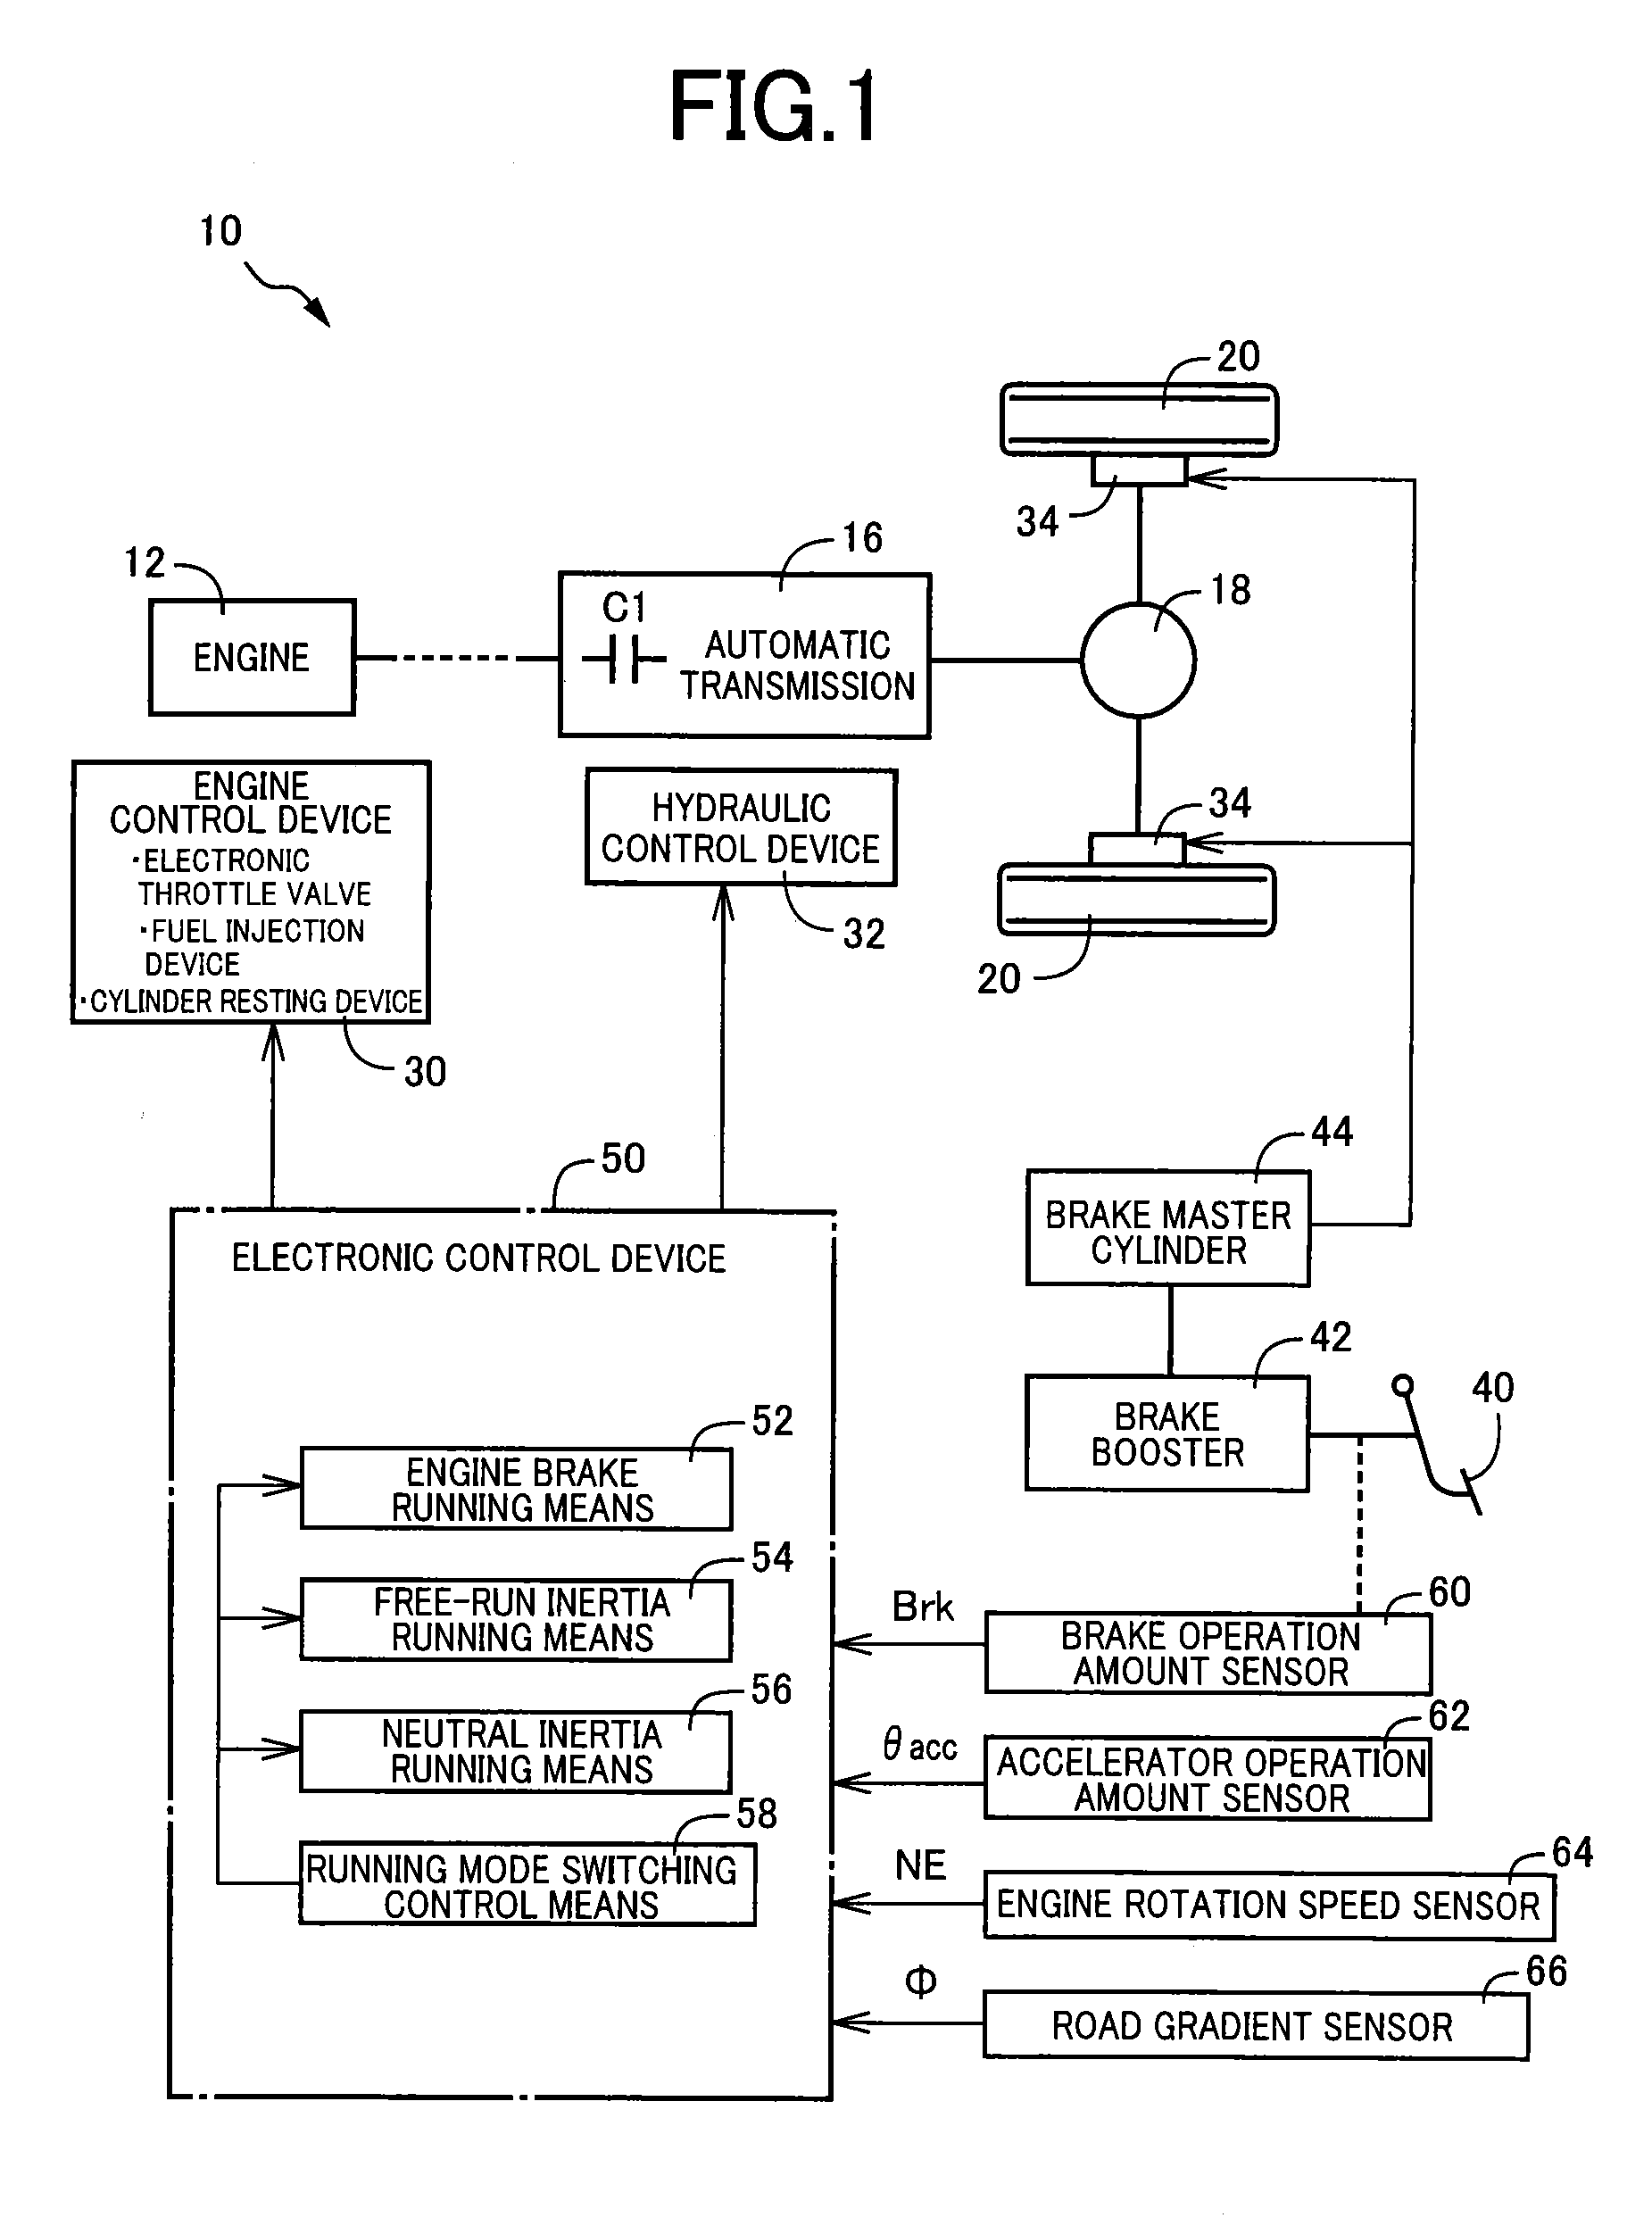 Vehicle travel controller